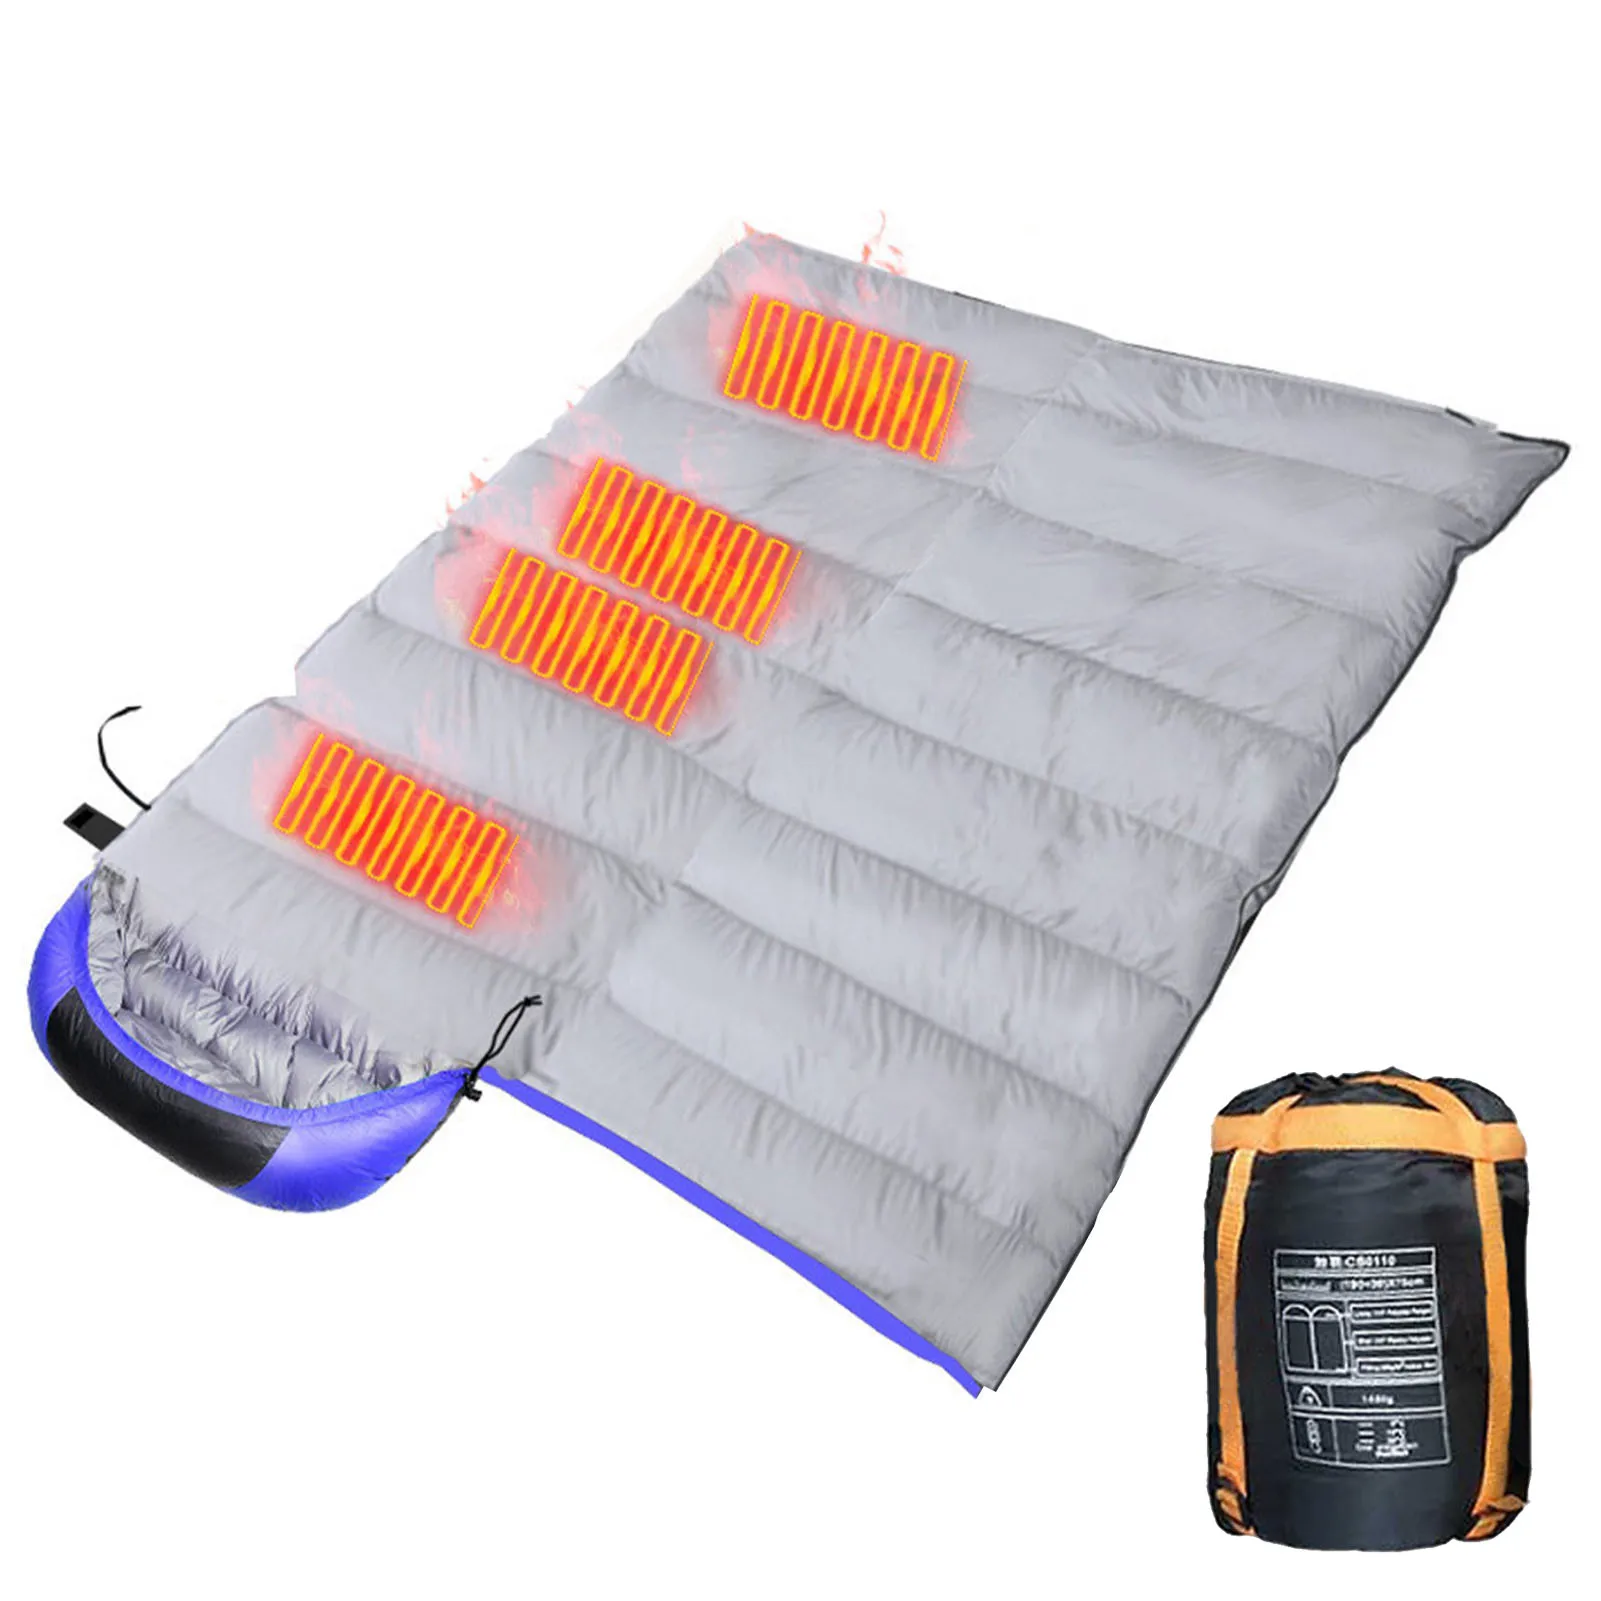 4 Heating Zones Multi USB Power Support Heating Pads Portable Compact Bag Temperature Adjustable For Camping